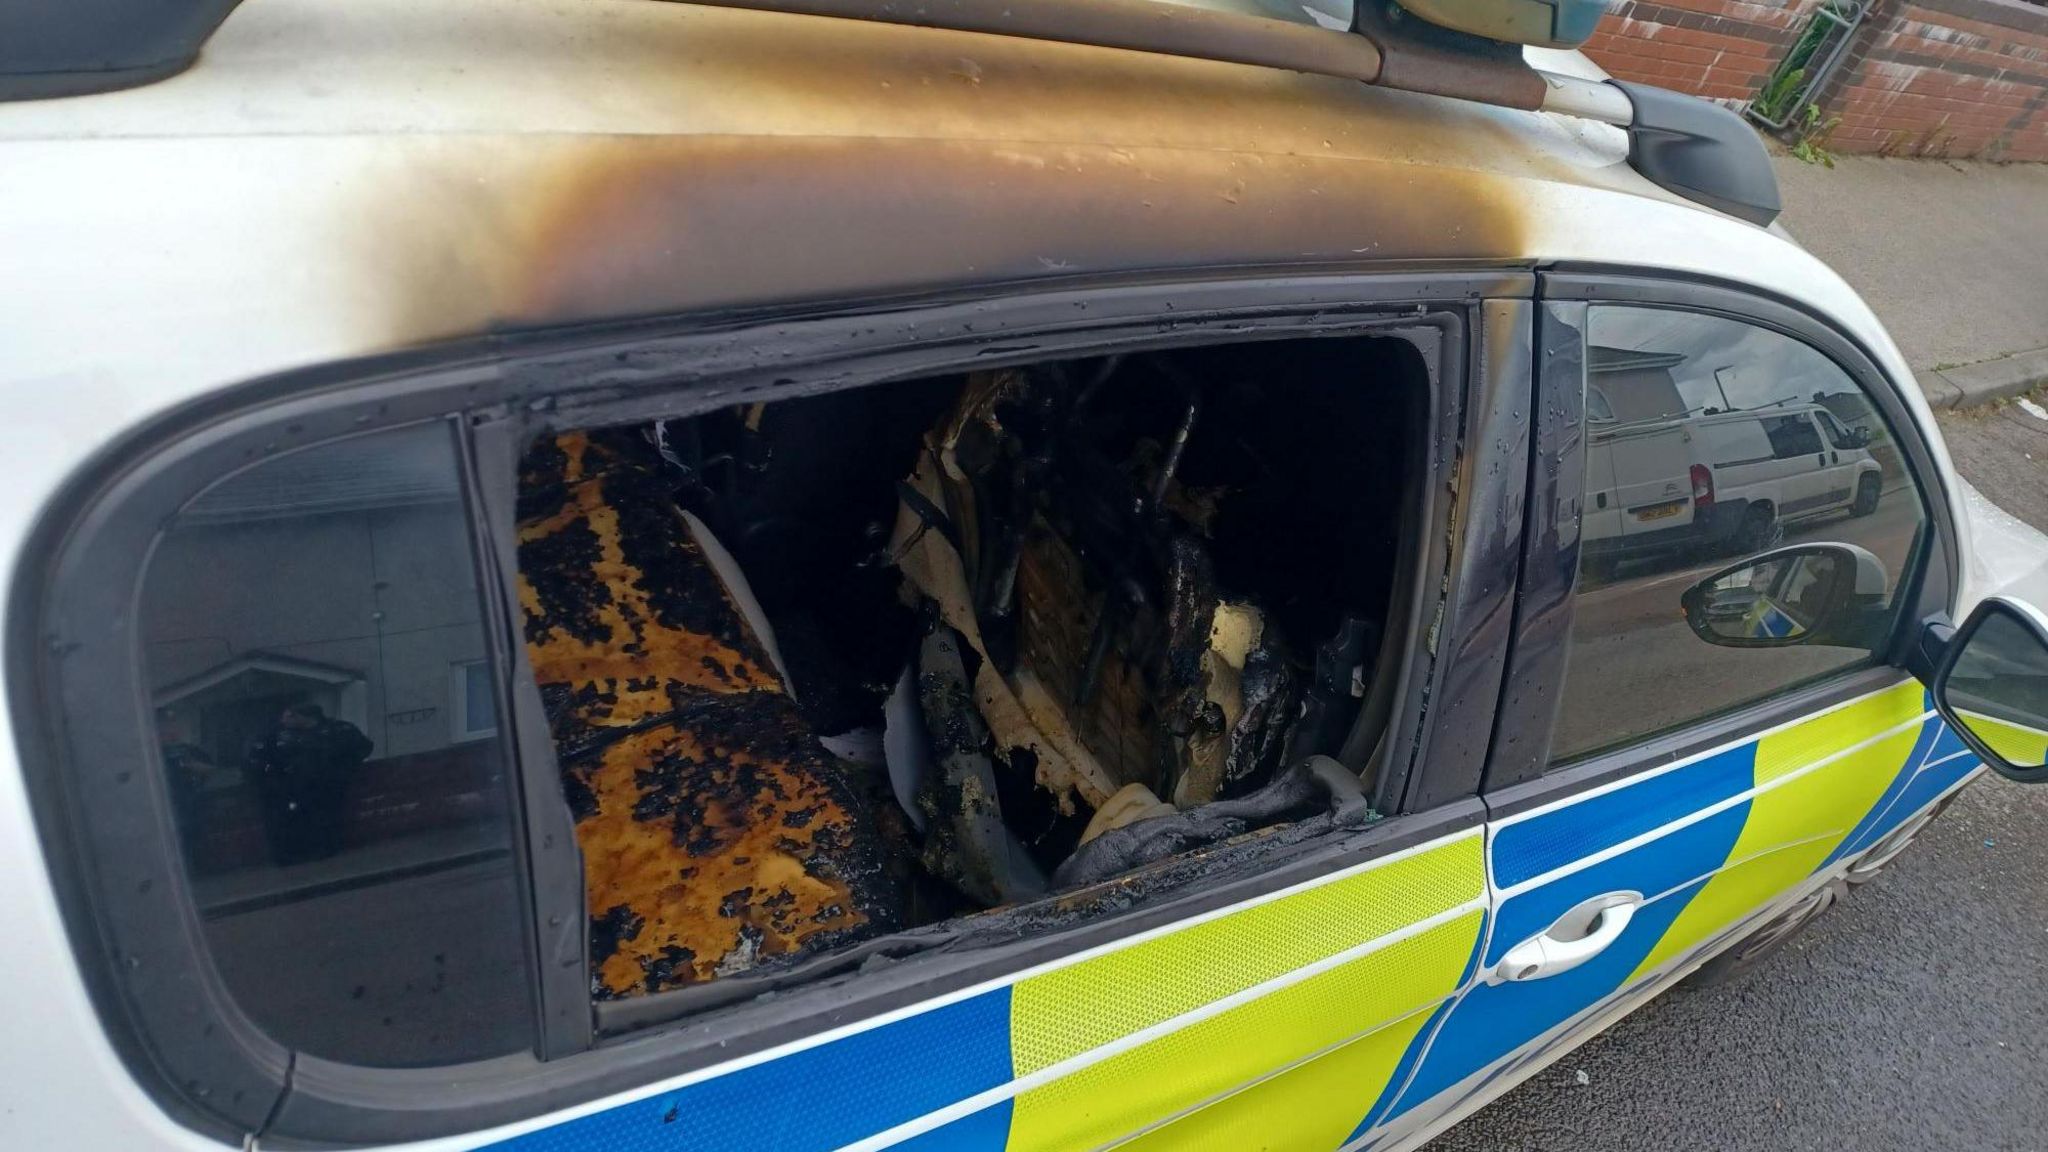 The police car's smashed window and burnt interior